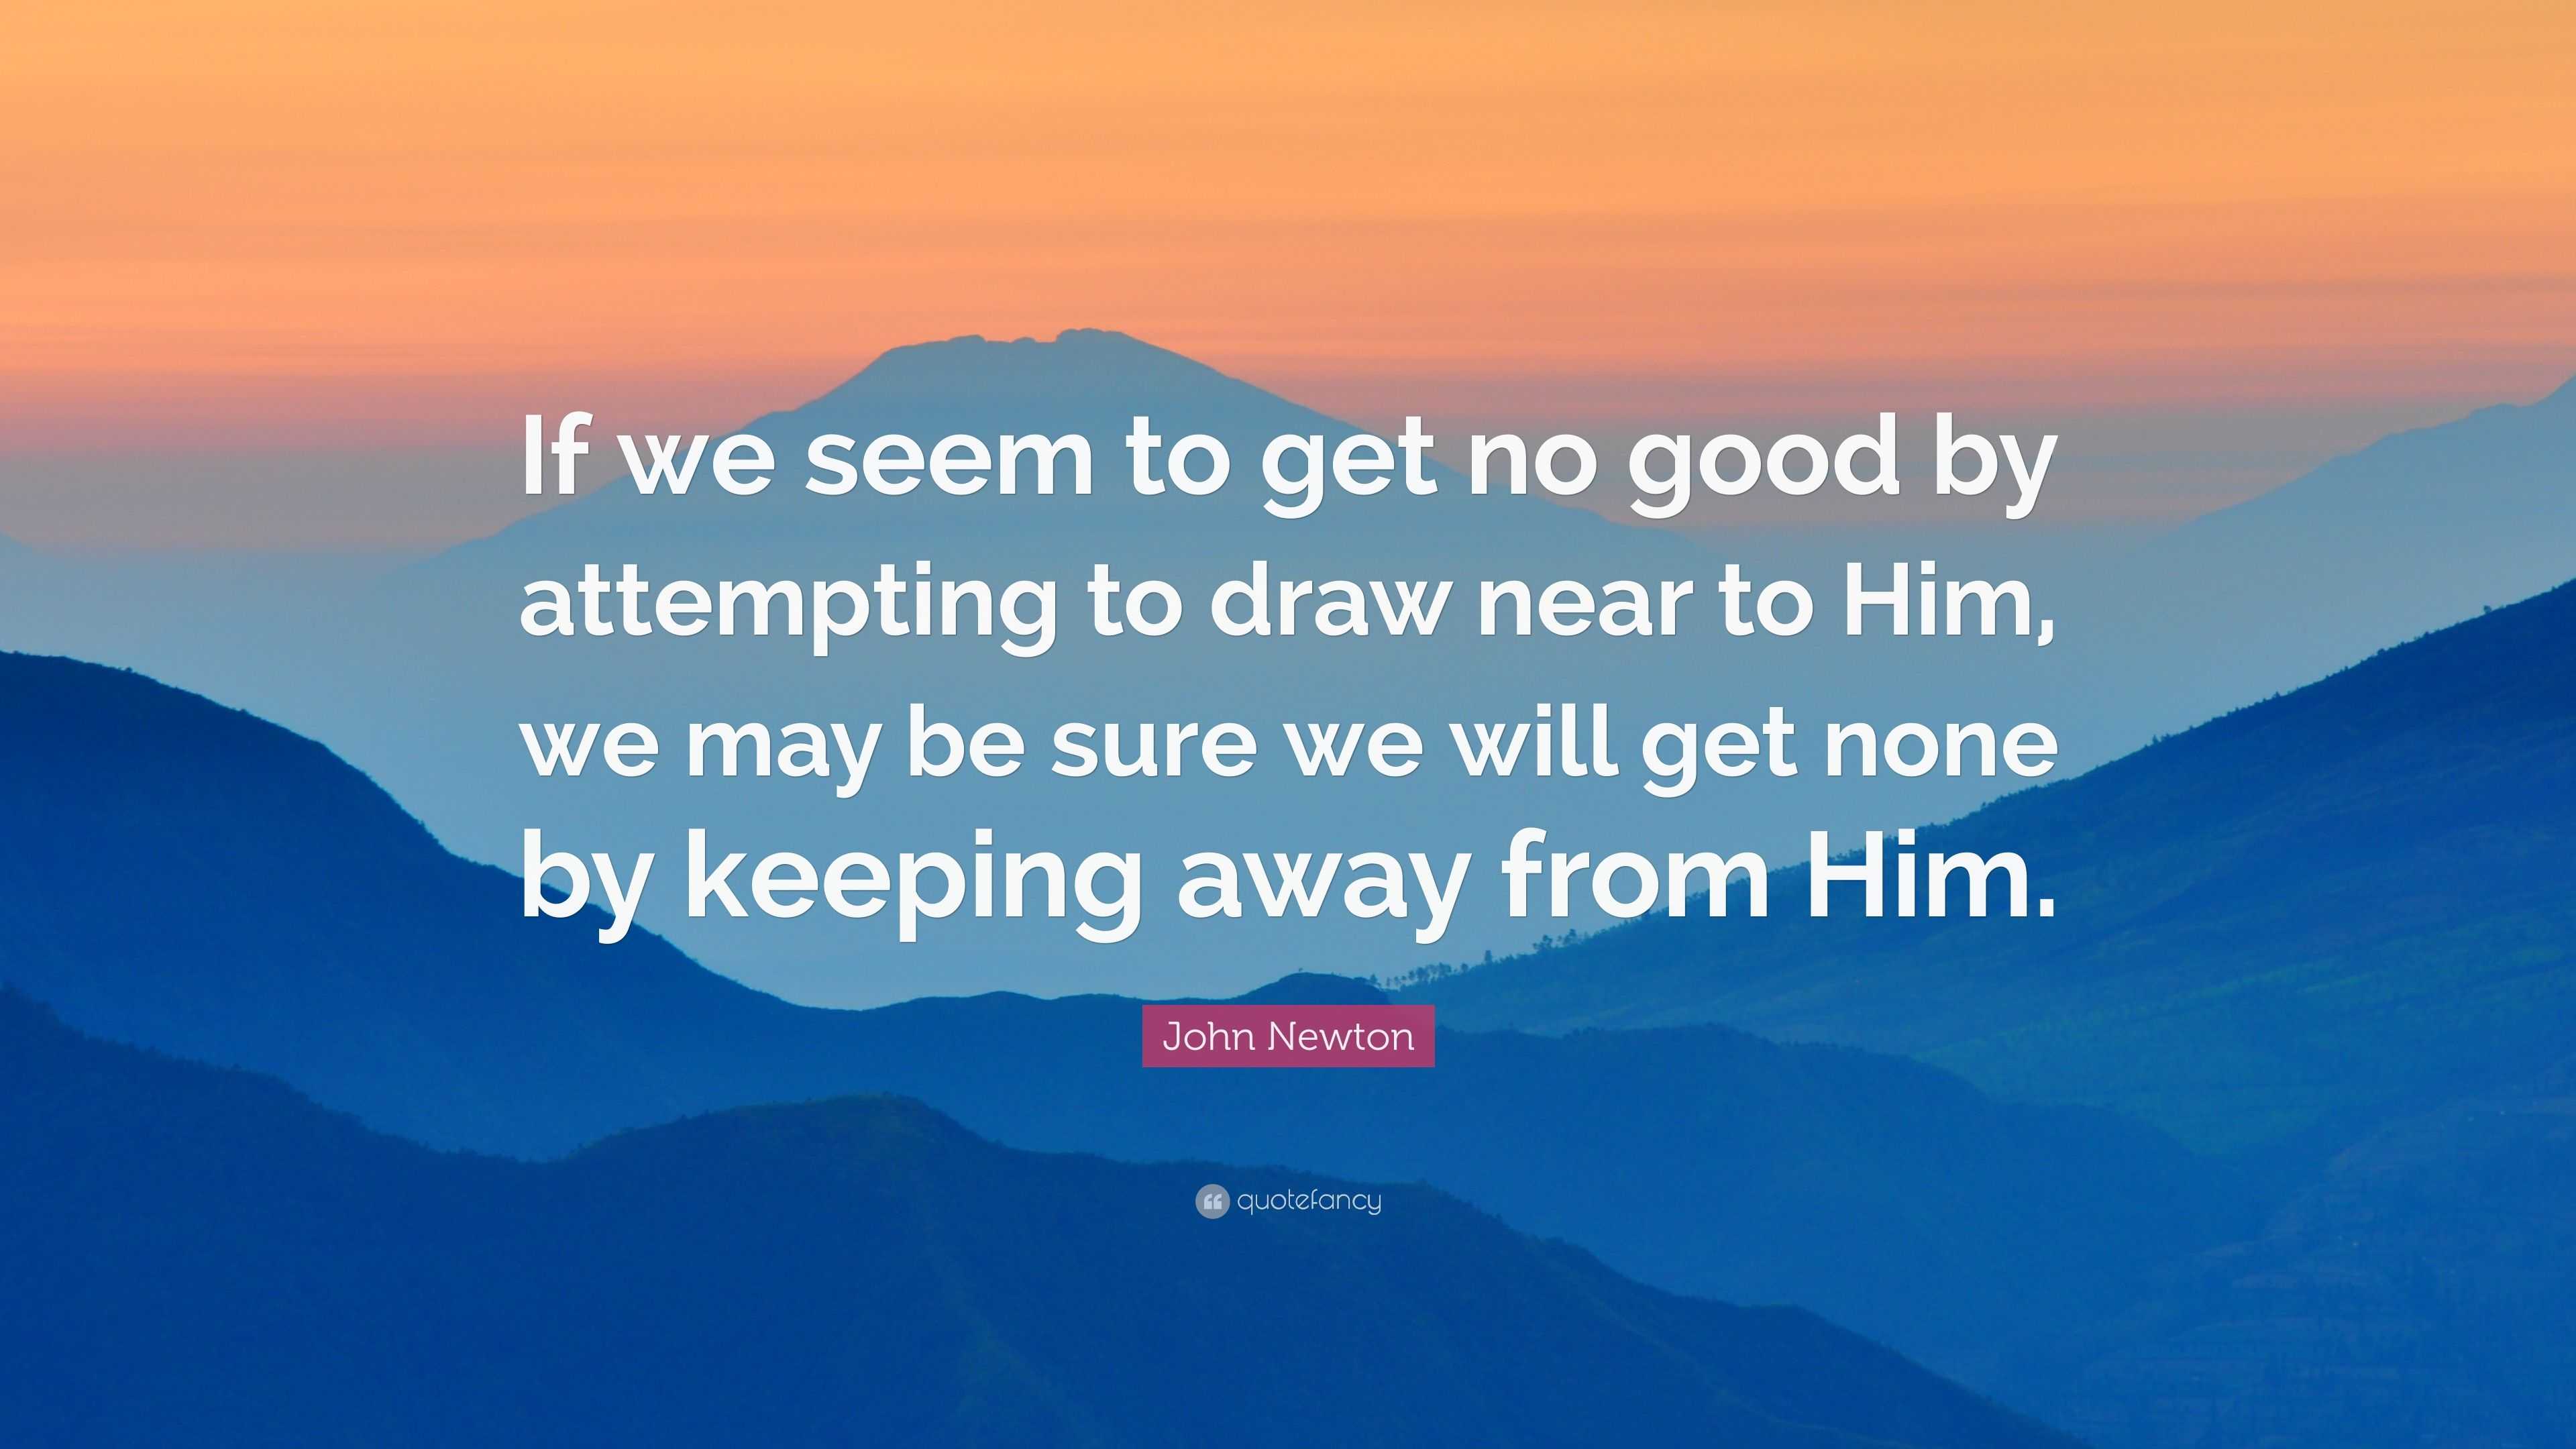 John Newton Quote: “If we seem to get no good by attempting to draw ...